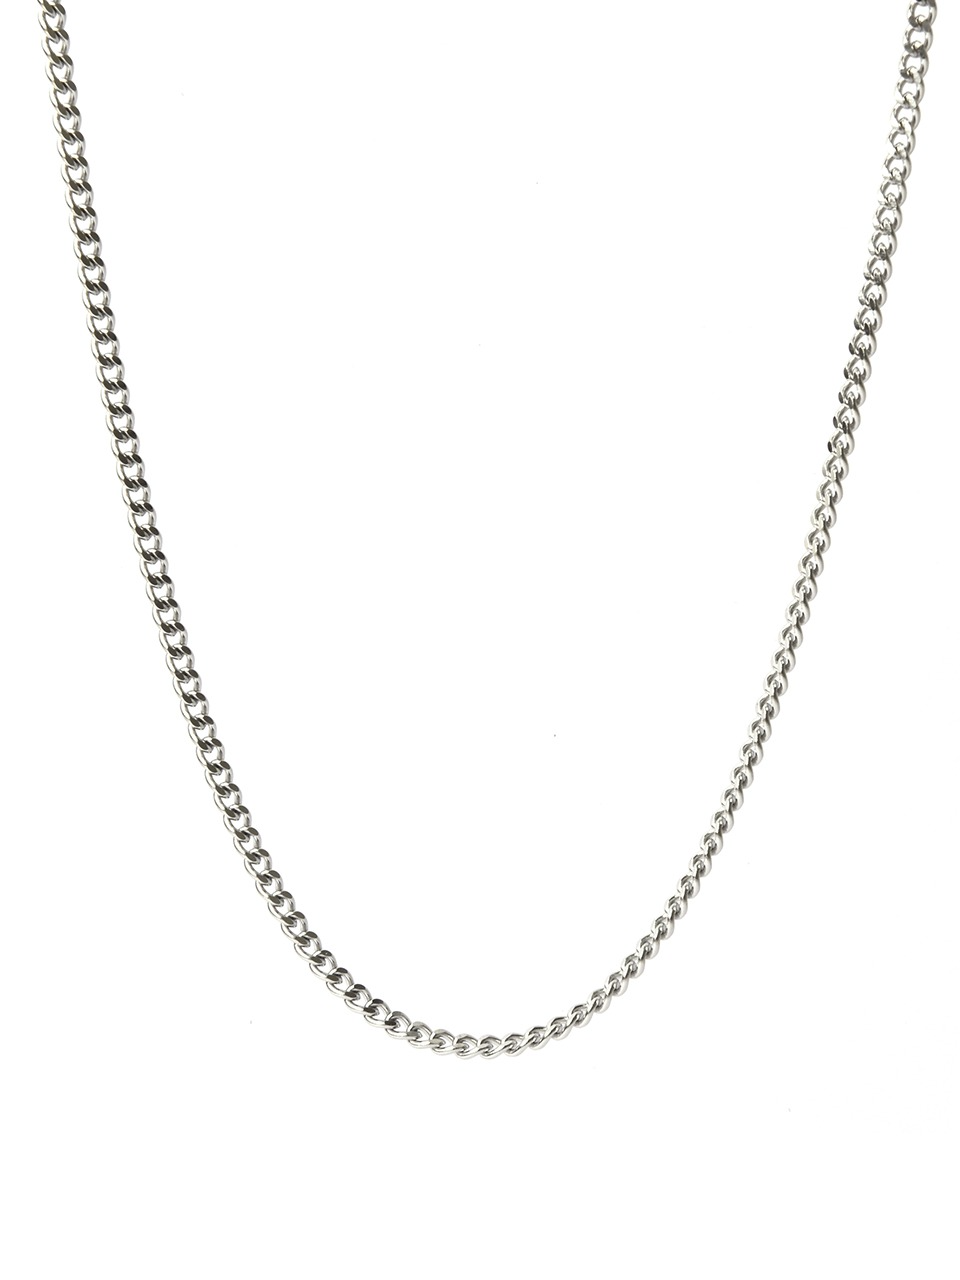 BA012 [Surgical steel] Simple chain necklace